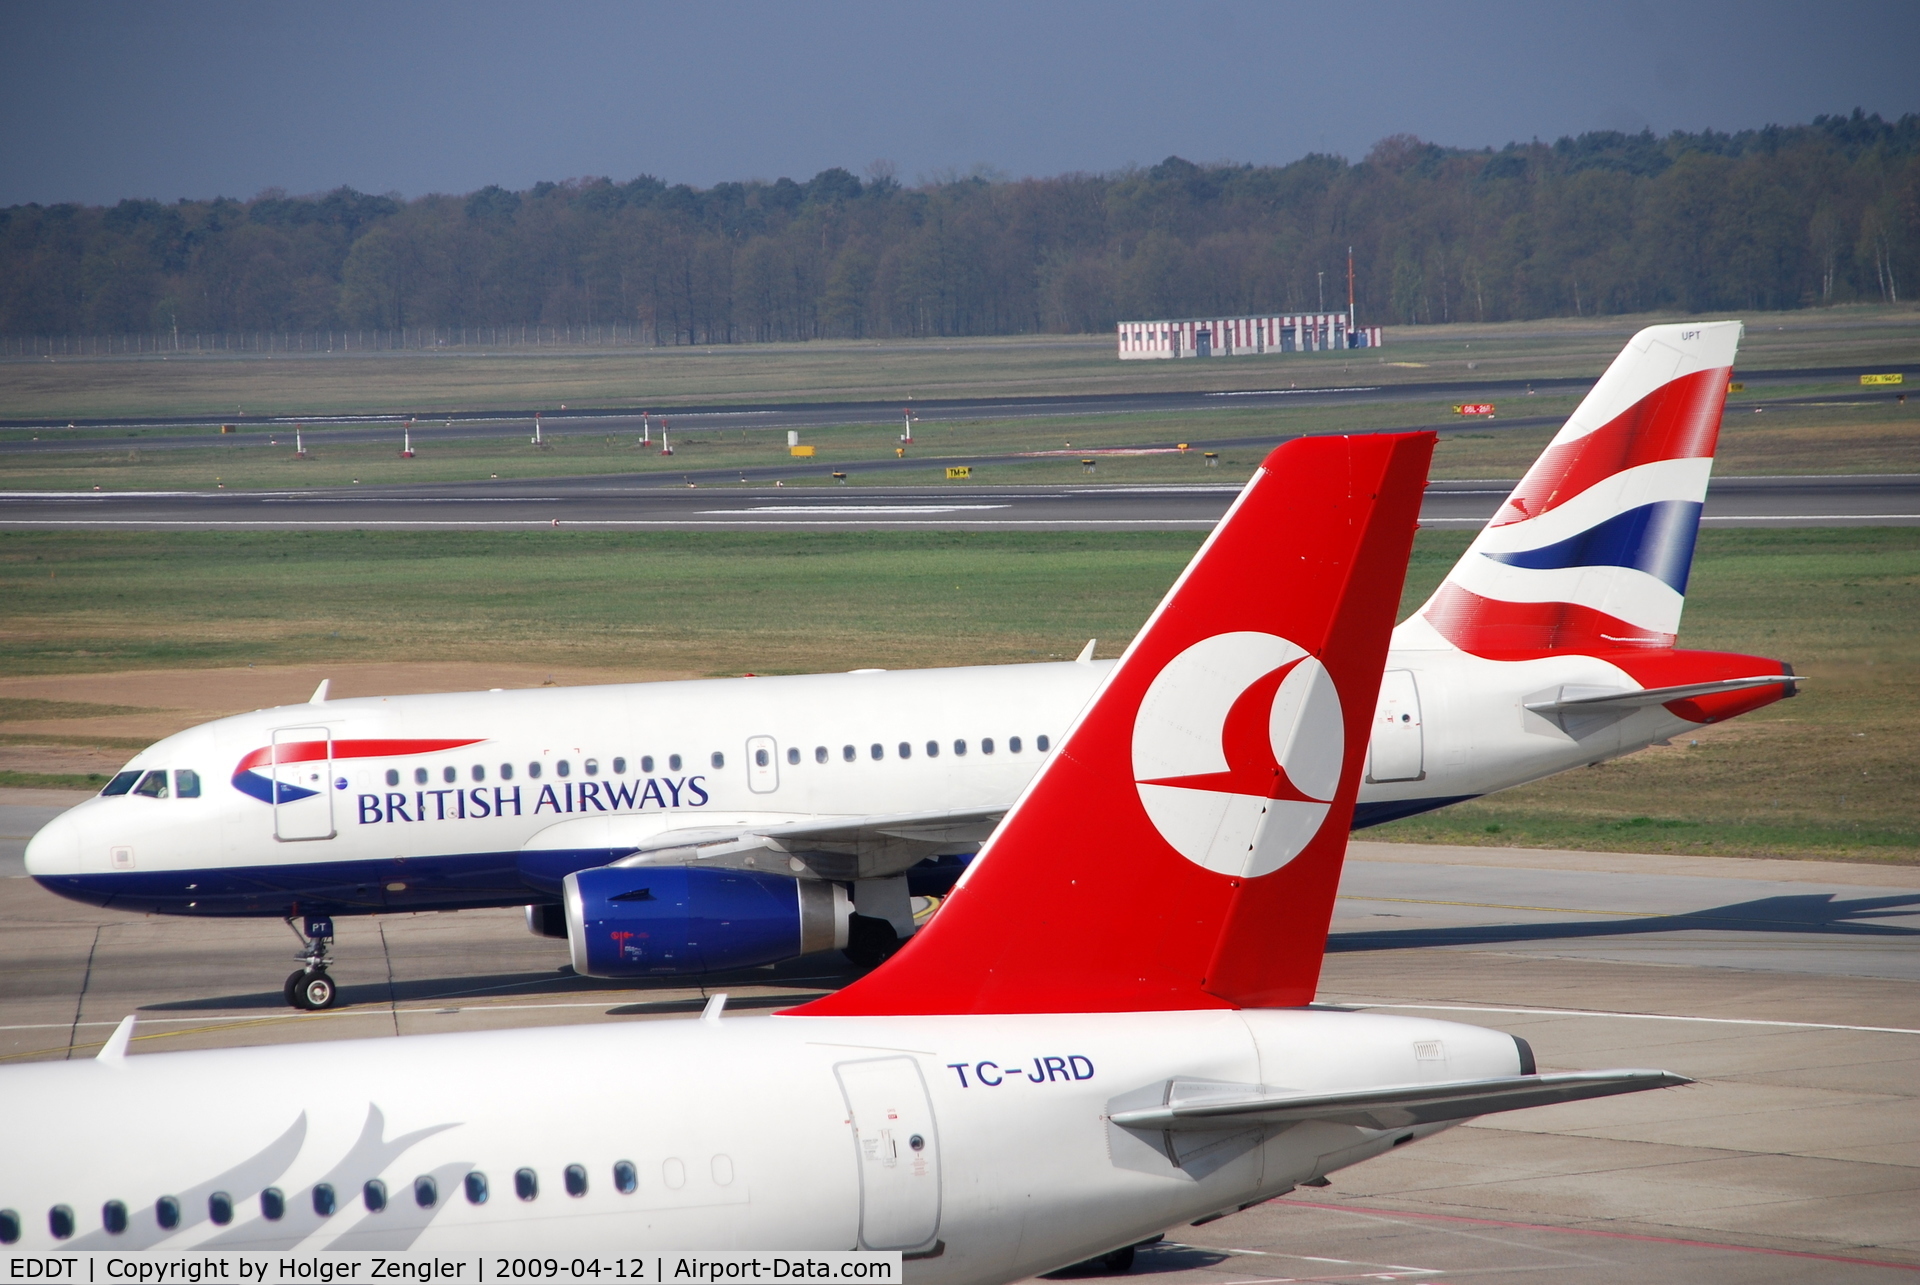 Tegel International Airport (closing in 2011), Berlin Germany (EDDT) - Sisters in red, blue and white